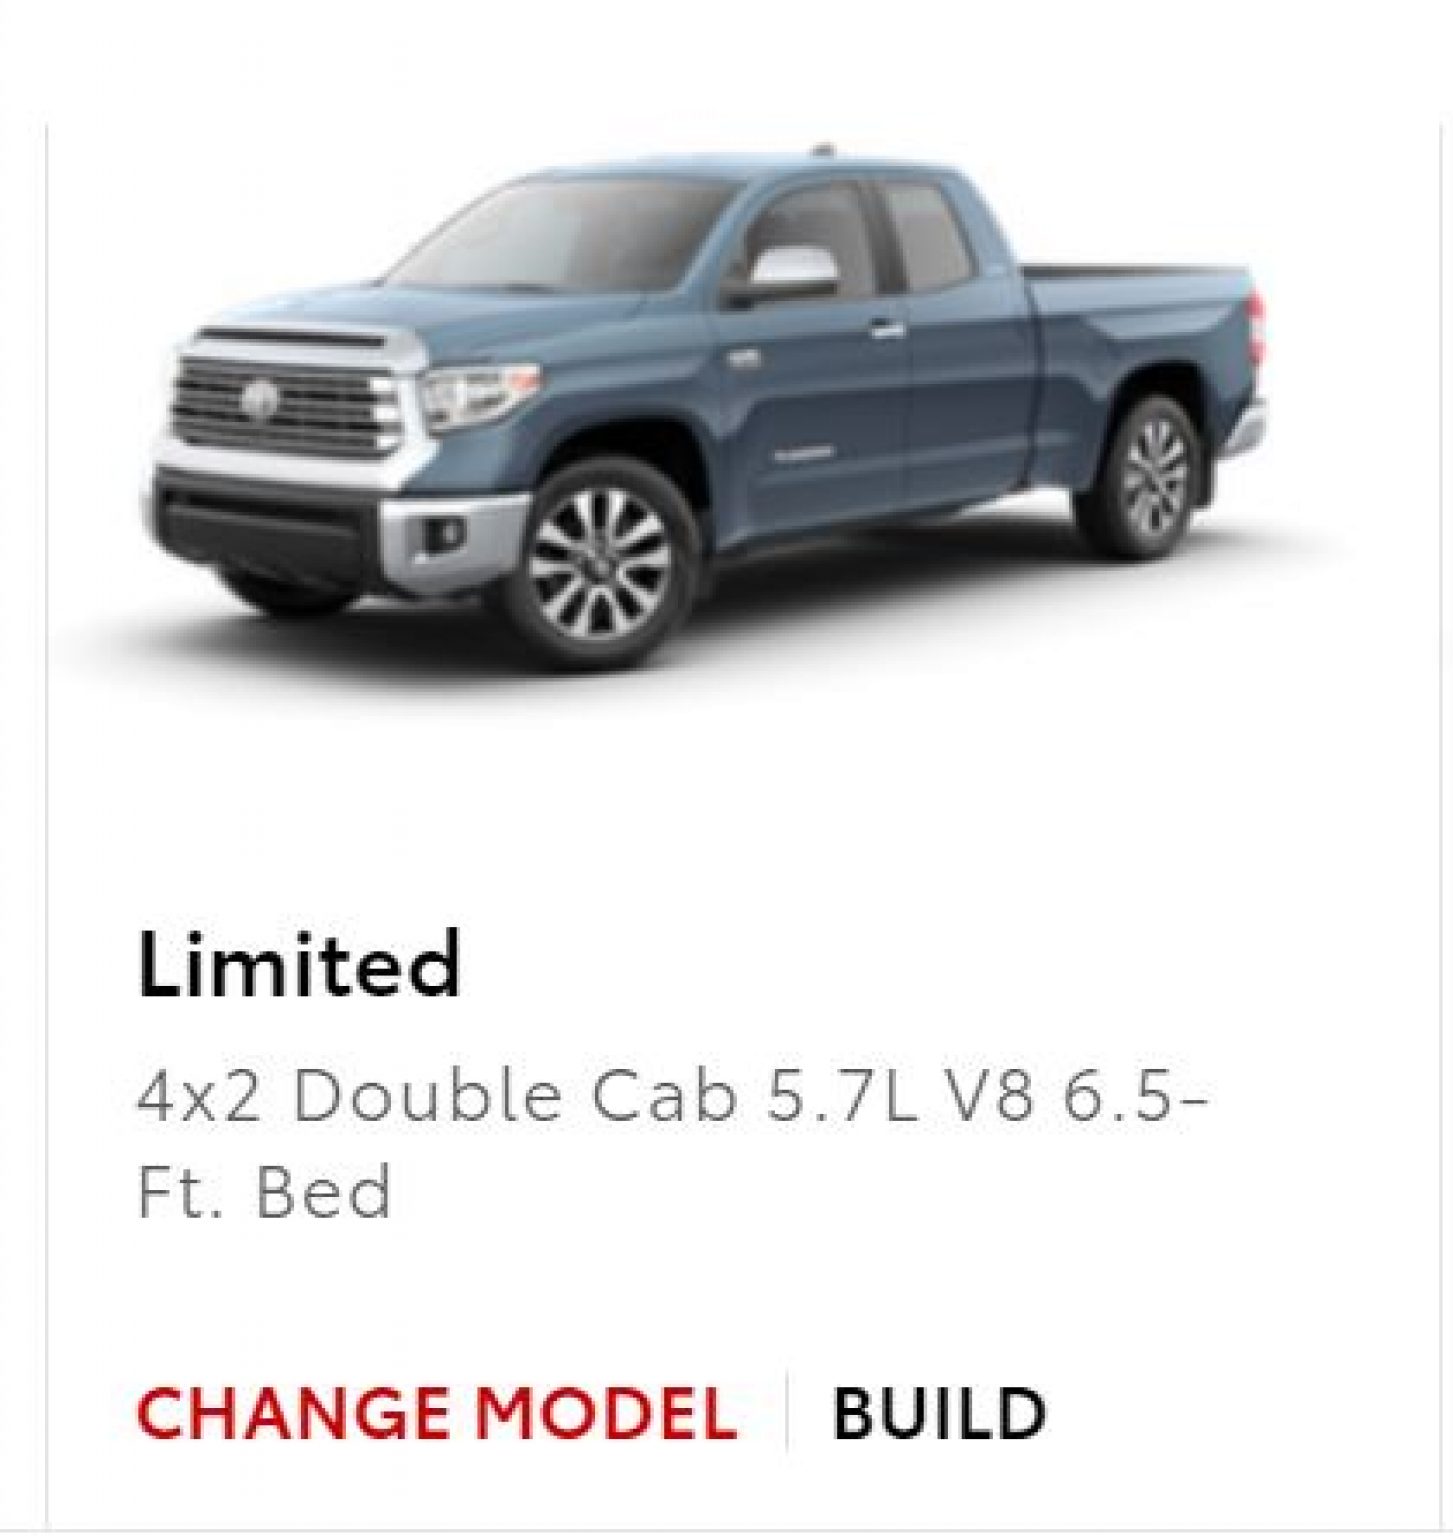 Toyota Tundra Double Cab Vs CrewMax (Every Difference)